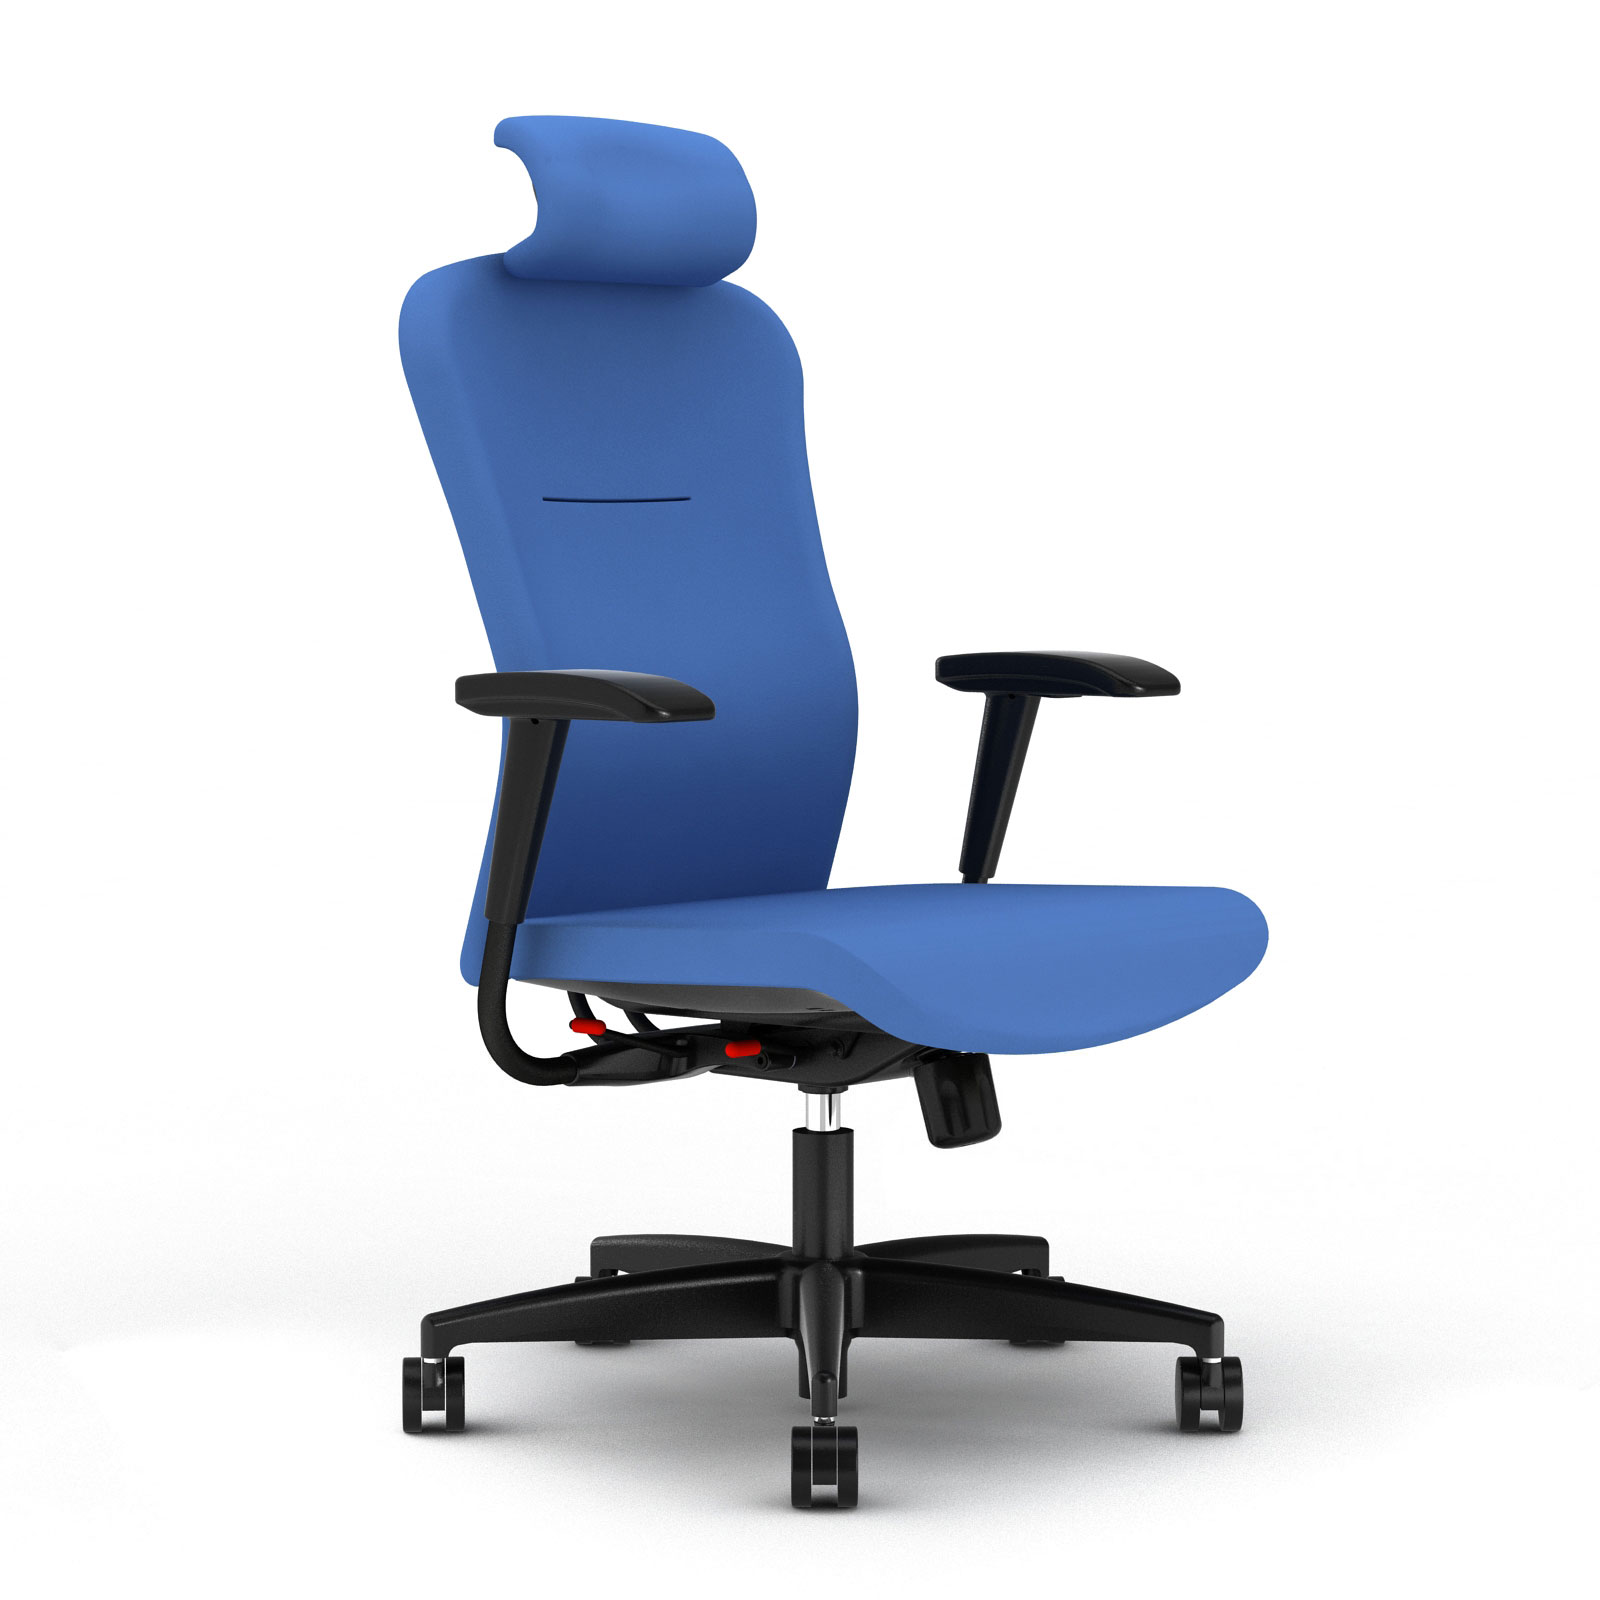 Team chair in blue fabrics and 2013 mechanism